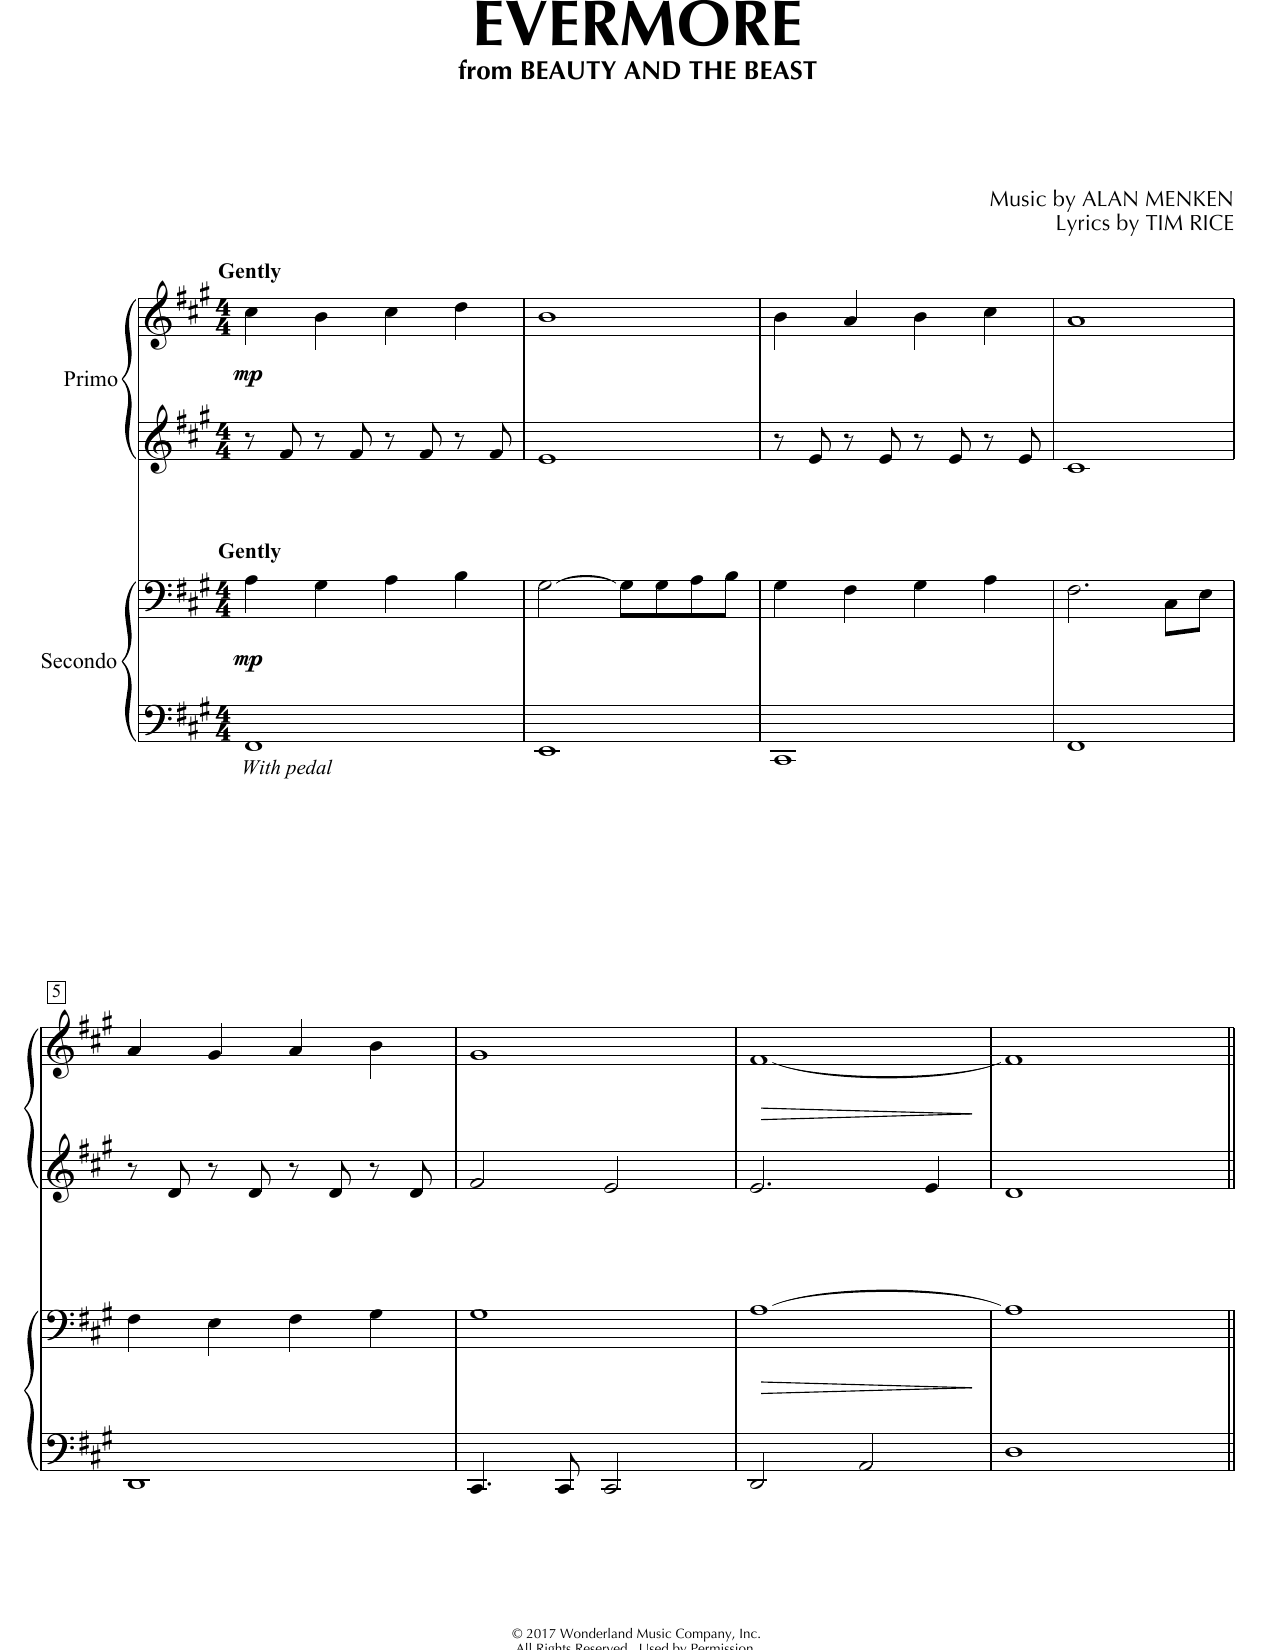 Alan Menken Evermore (from Beauty and The Beast) sheet music notes and chords. Download Printable PDF.